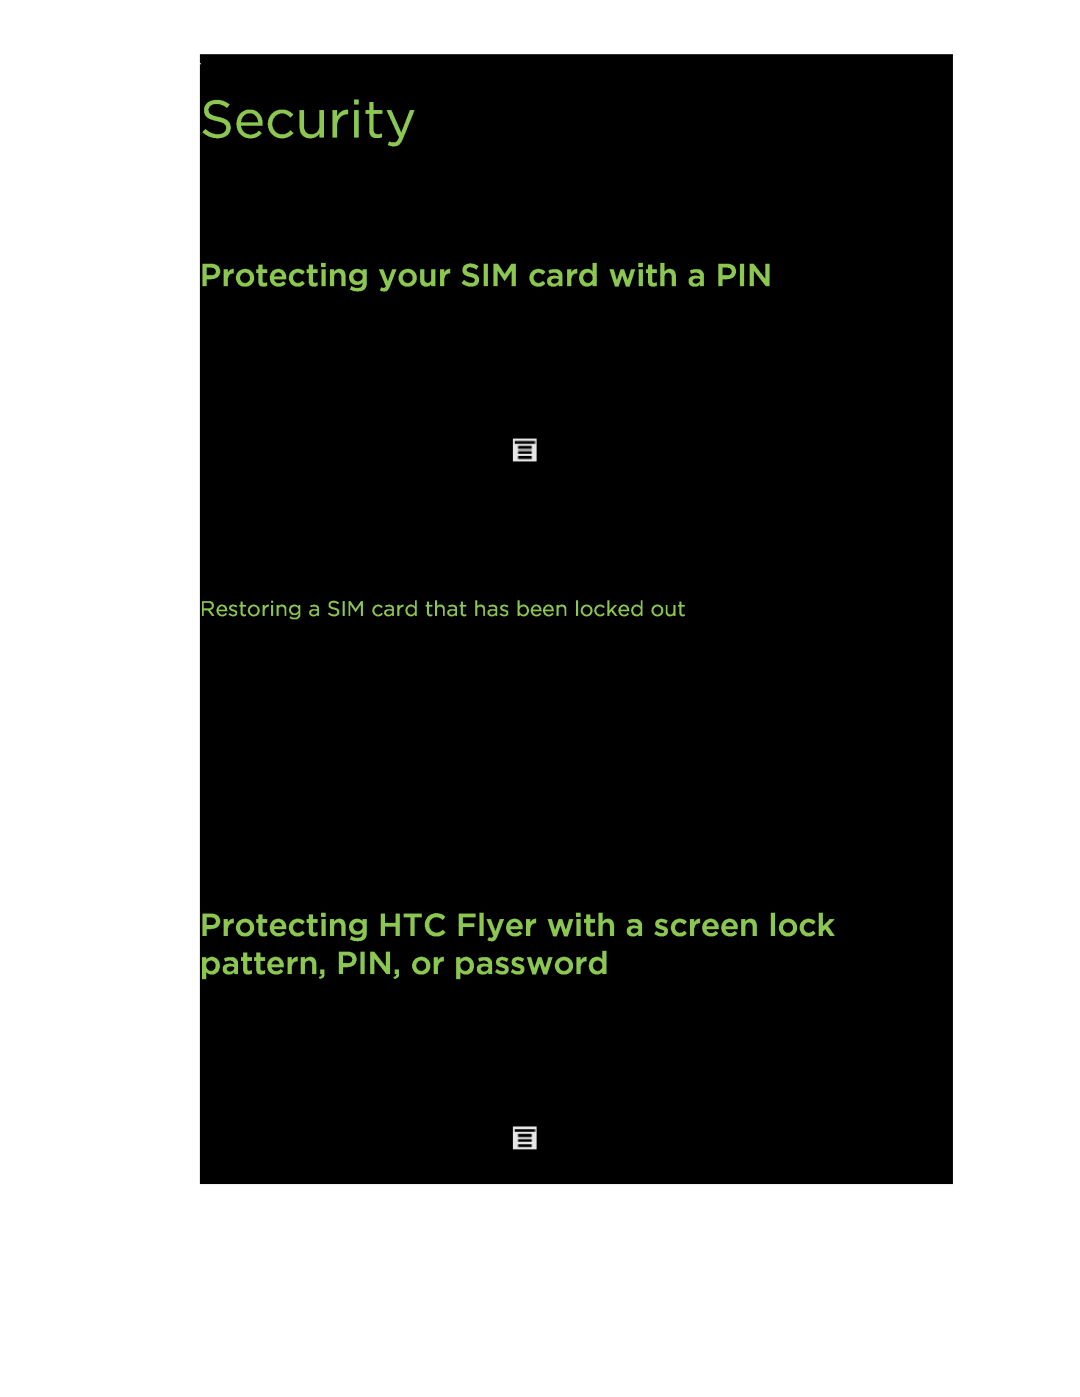 HTC HTCFlyerP512 manual Security, Protecting your SIM card with a PIN, Restoring a SIM card that has been locked out 